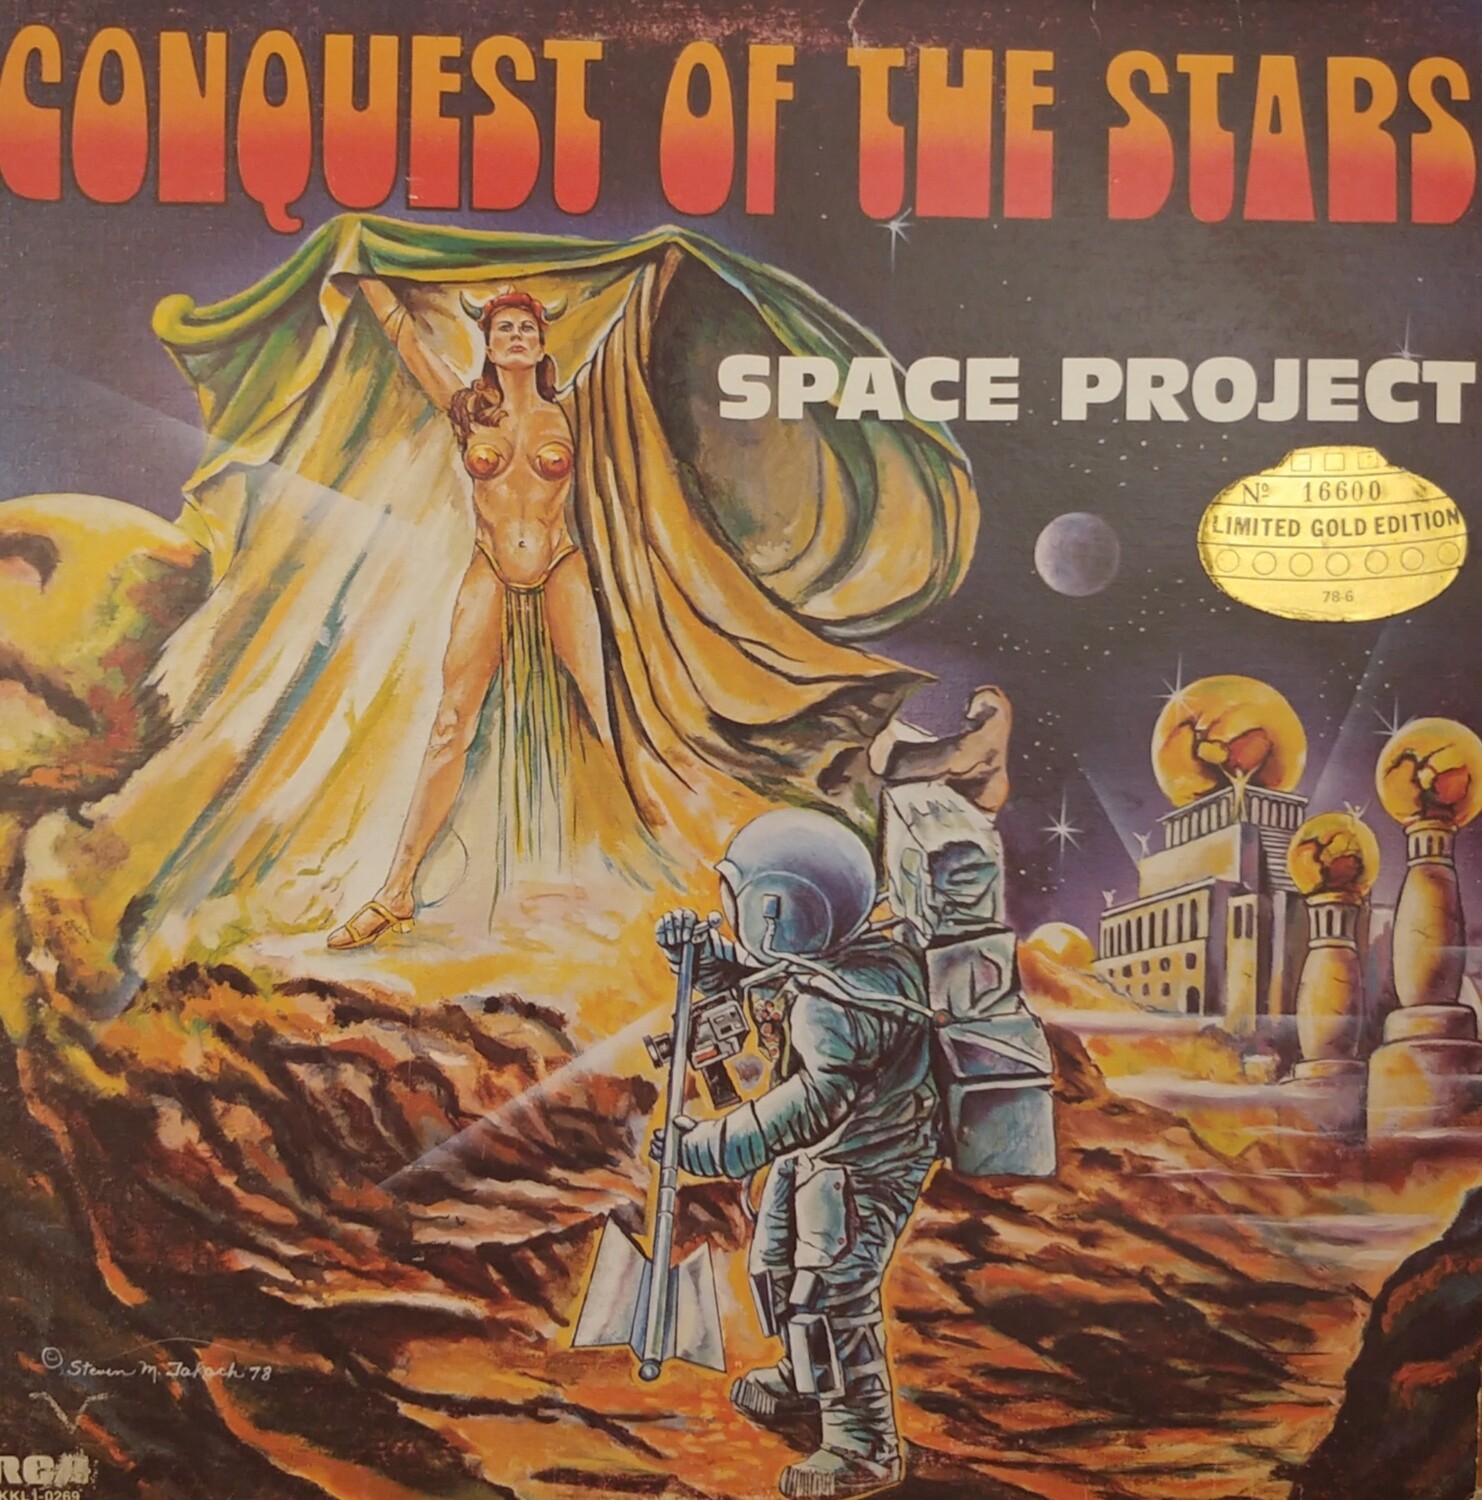 Space Project - Conquest of the stars